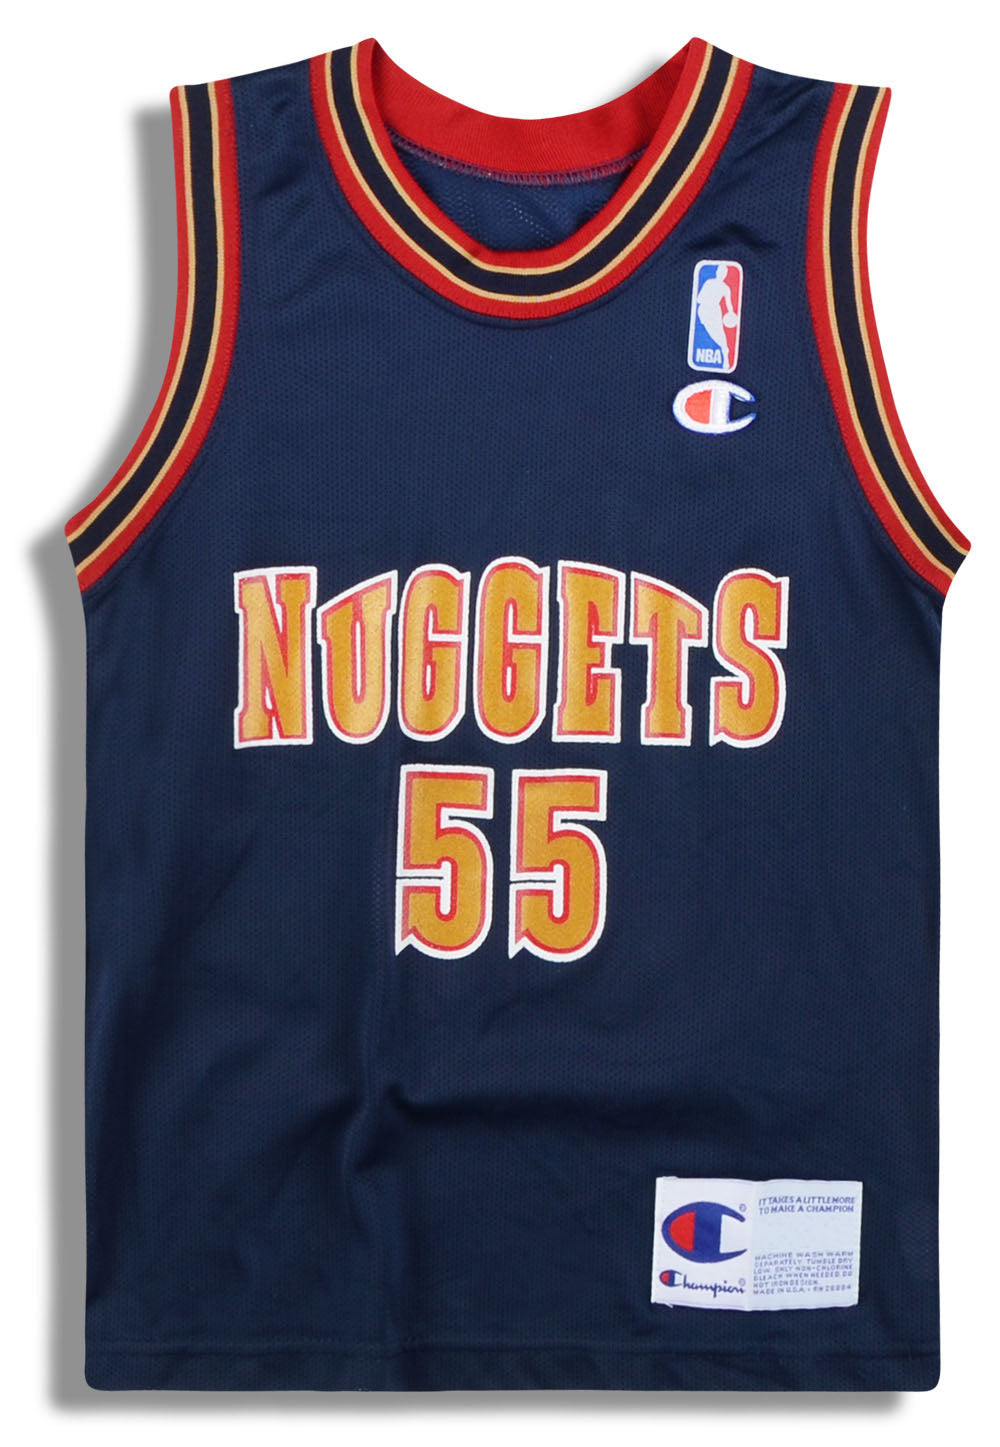 1993-95 DENVER NUGGETS MUTOMBO #55 CHAMPION JERSEY (AWAY) Y